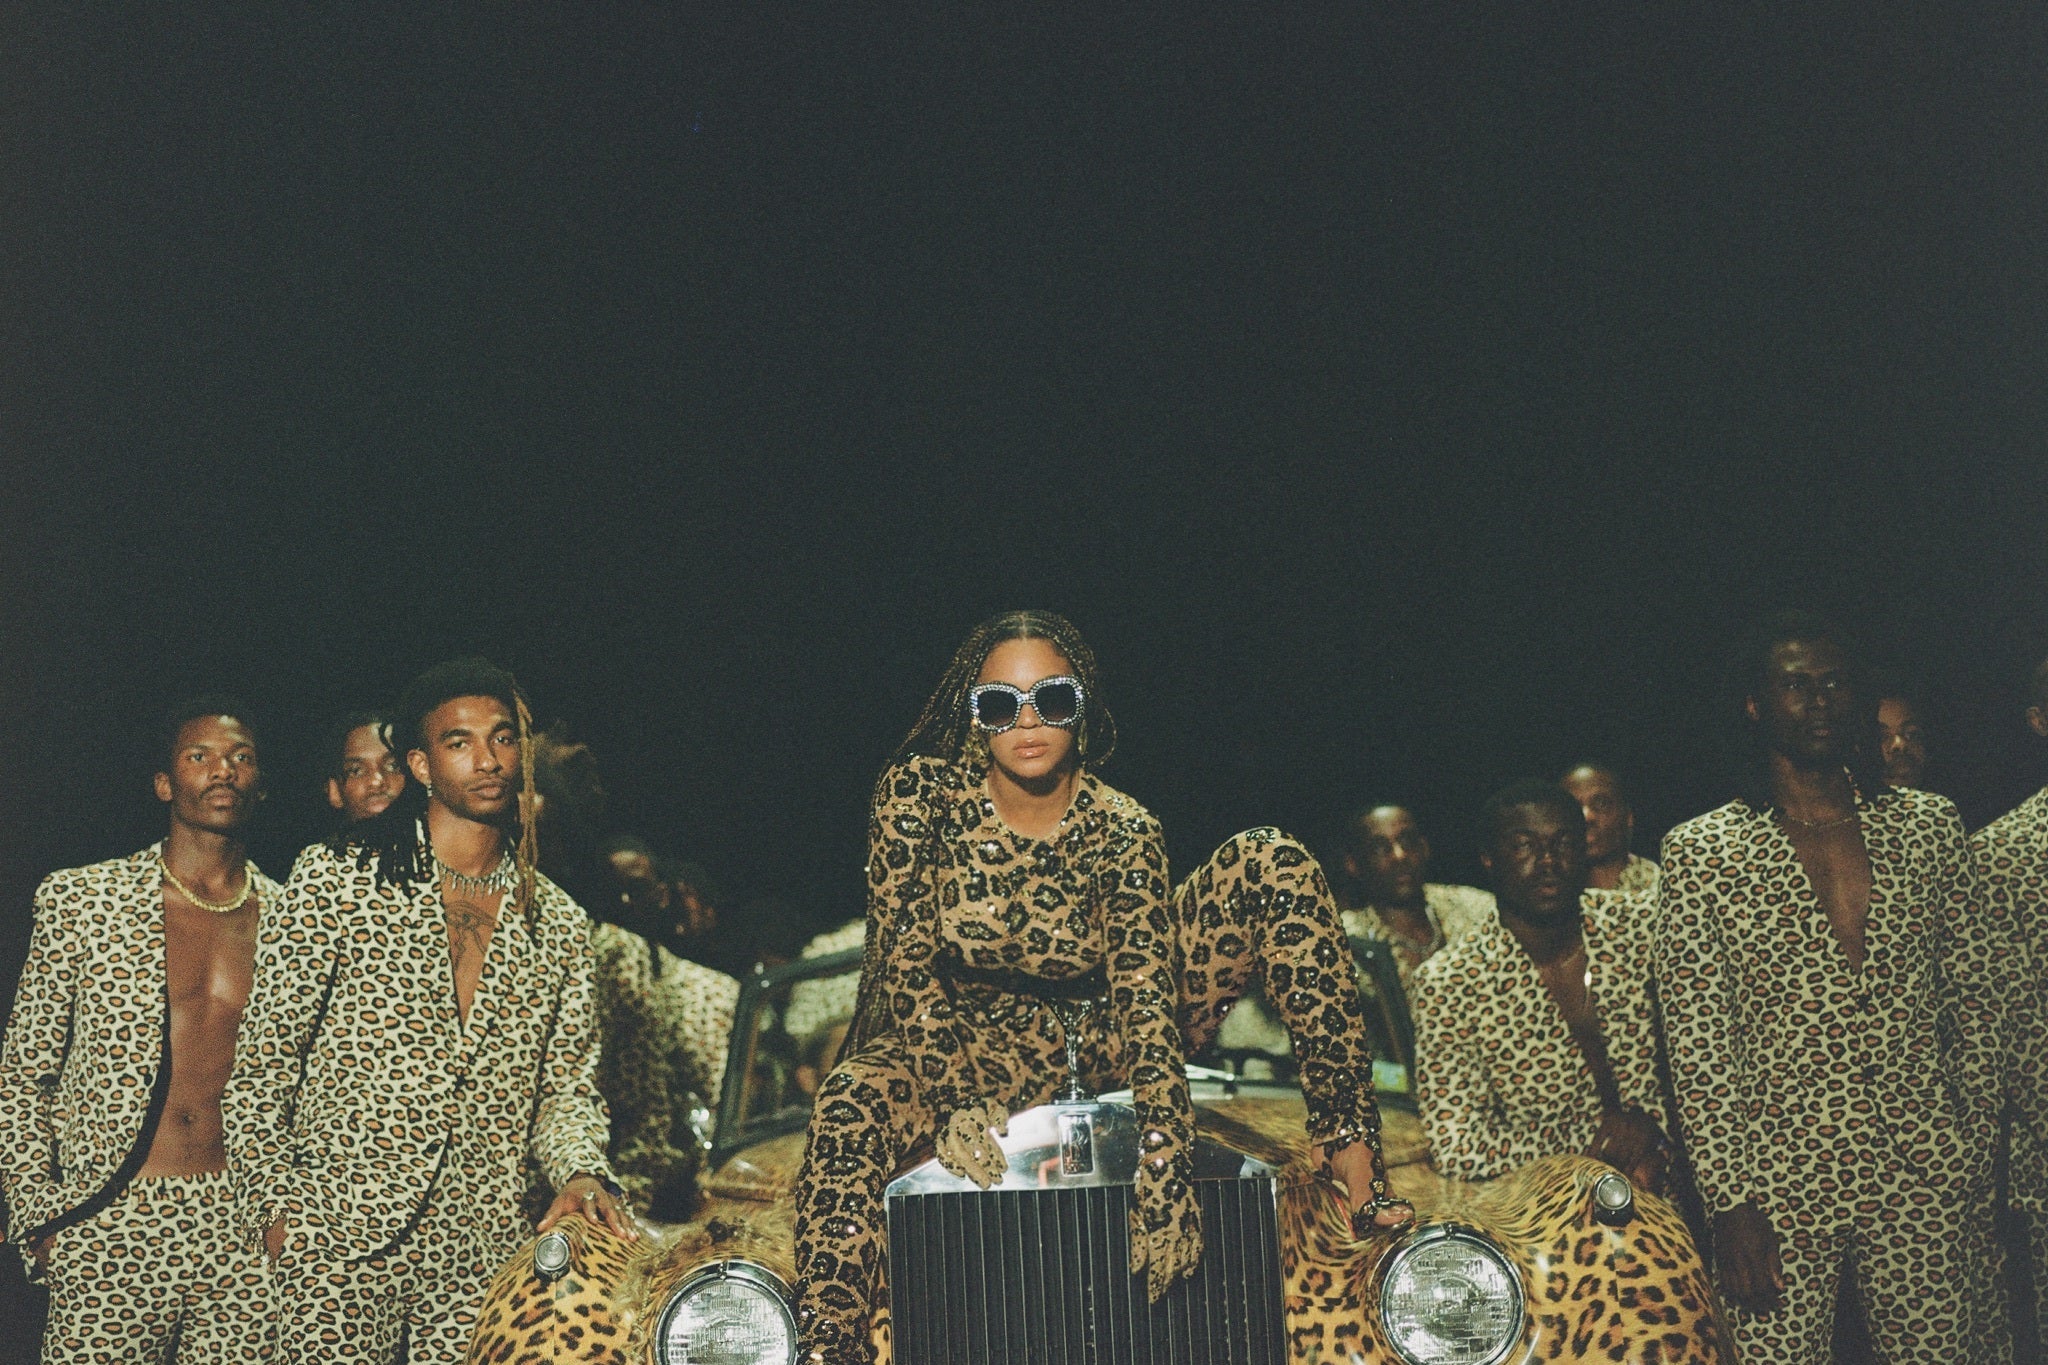 Beyoncé sits atop the grill of a vintage-looking, leopard-print automobile, surrounded by Black men wearing leopard-print blazers and leopard-print pants. She wears sunglasses, braids, and leopard print.